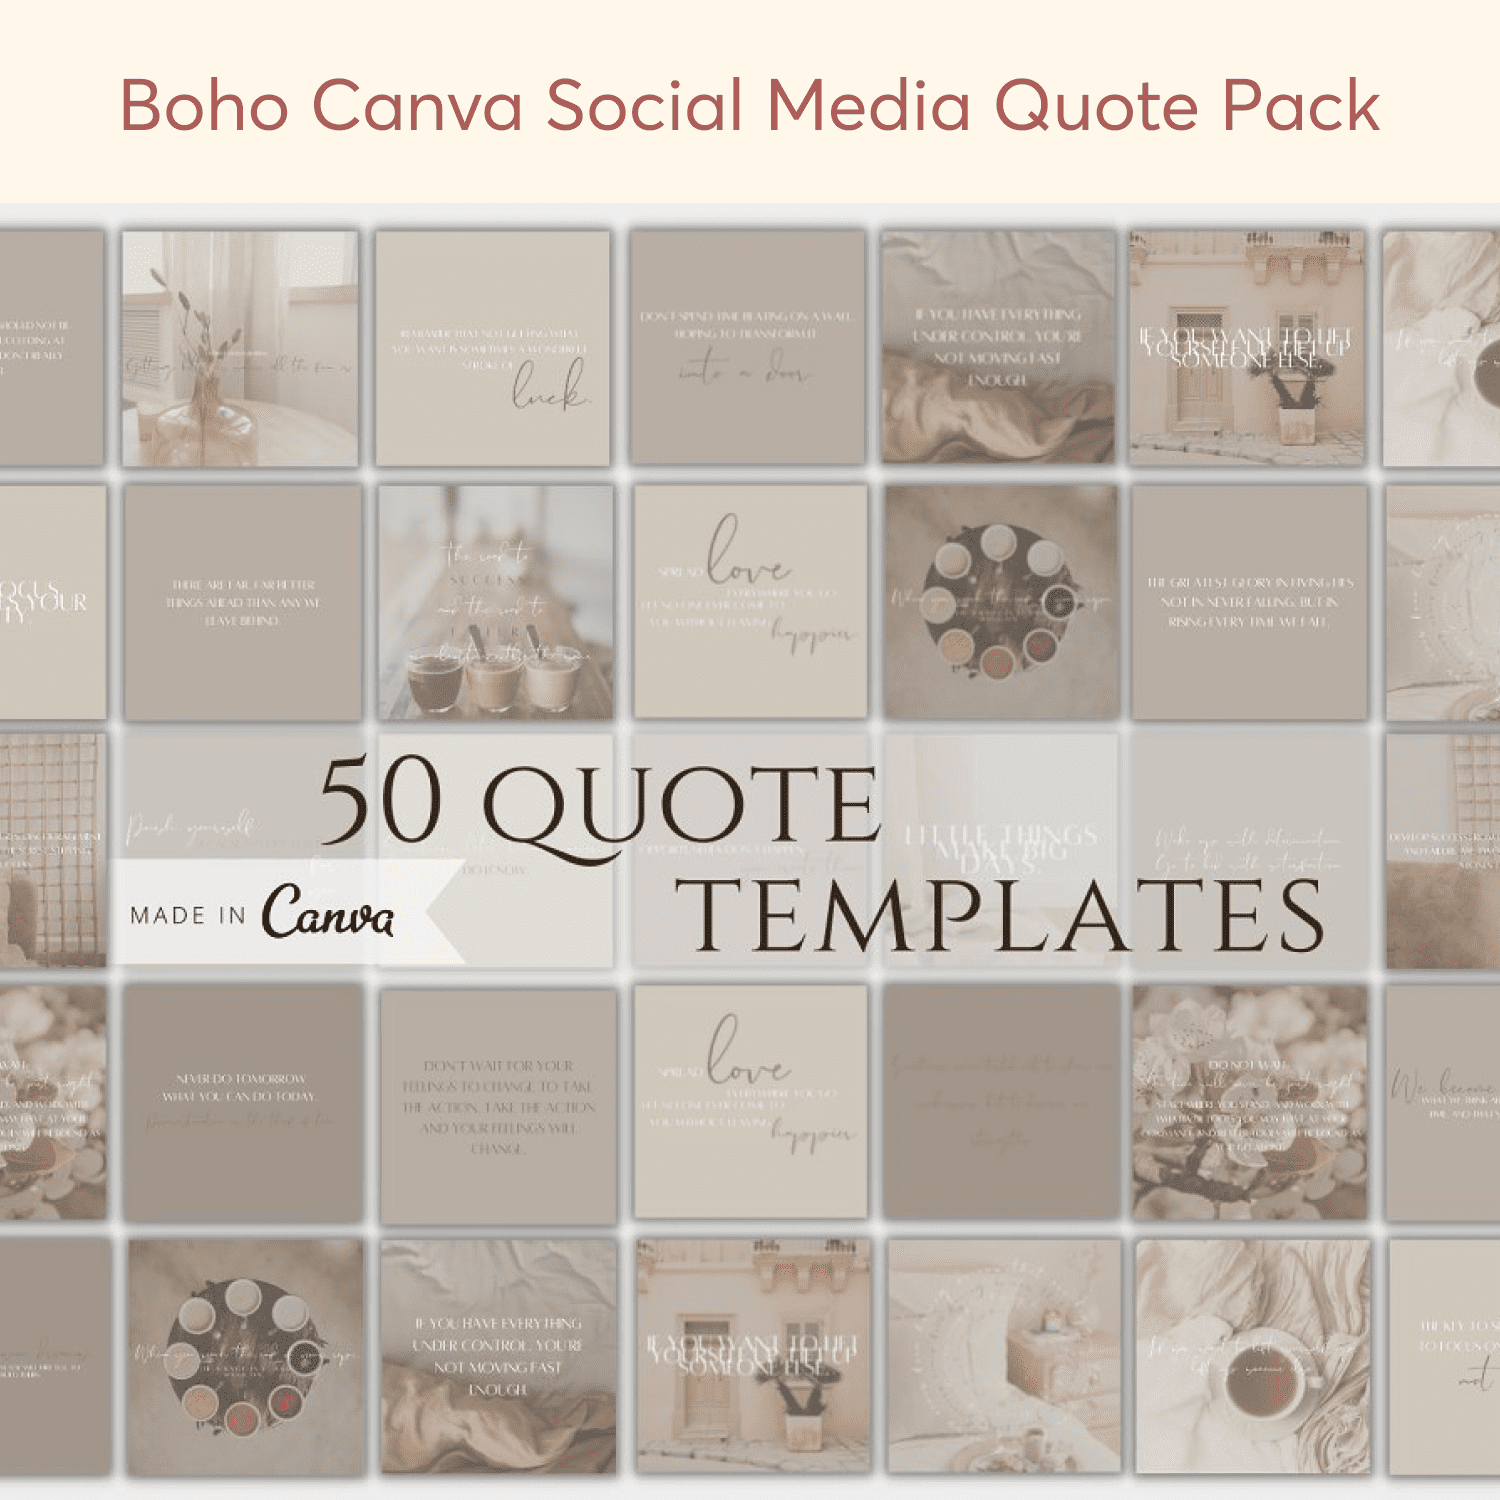 Boho Canva Social Media Quote Pack cover image.